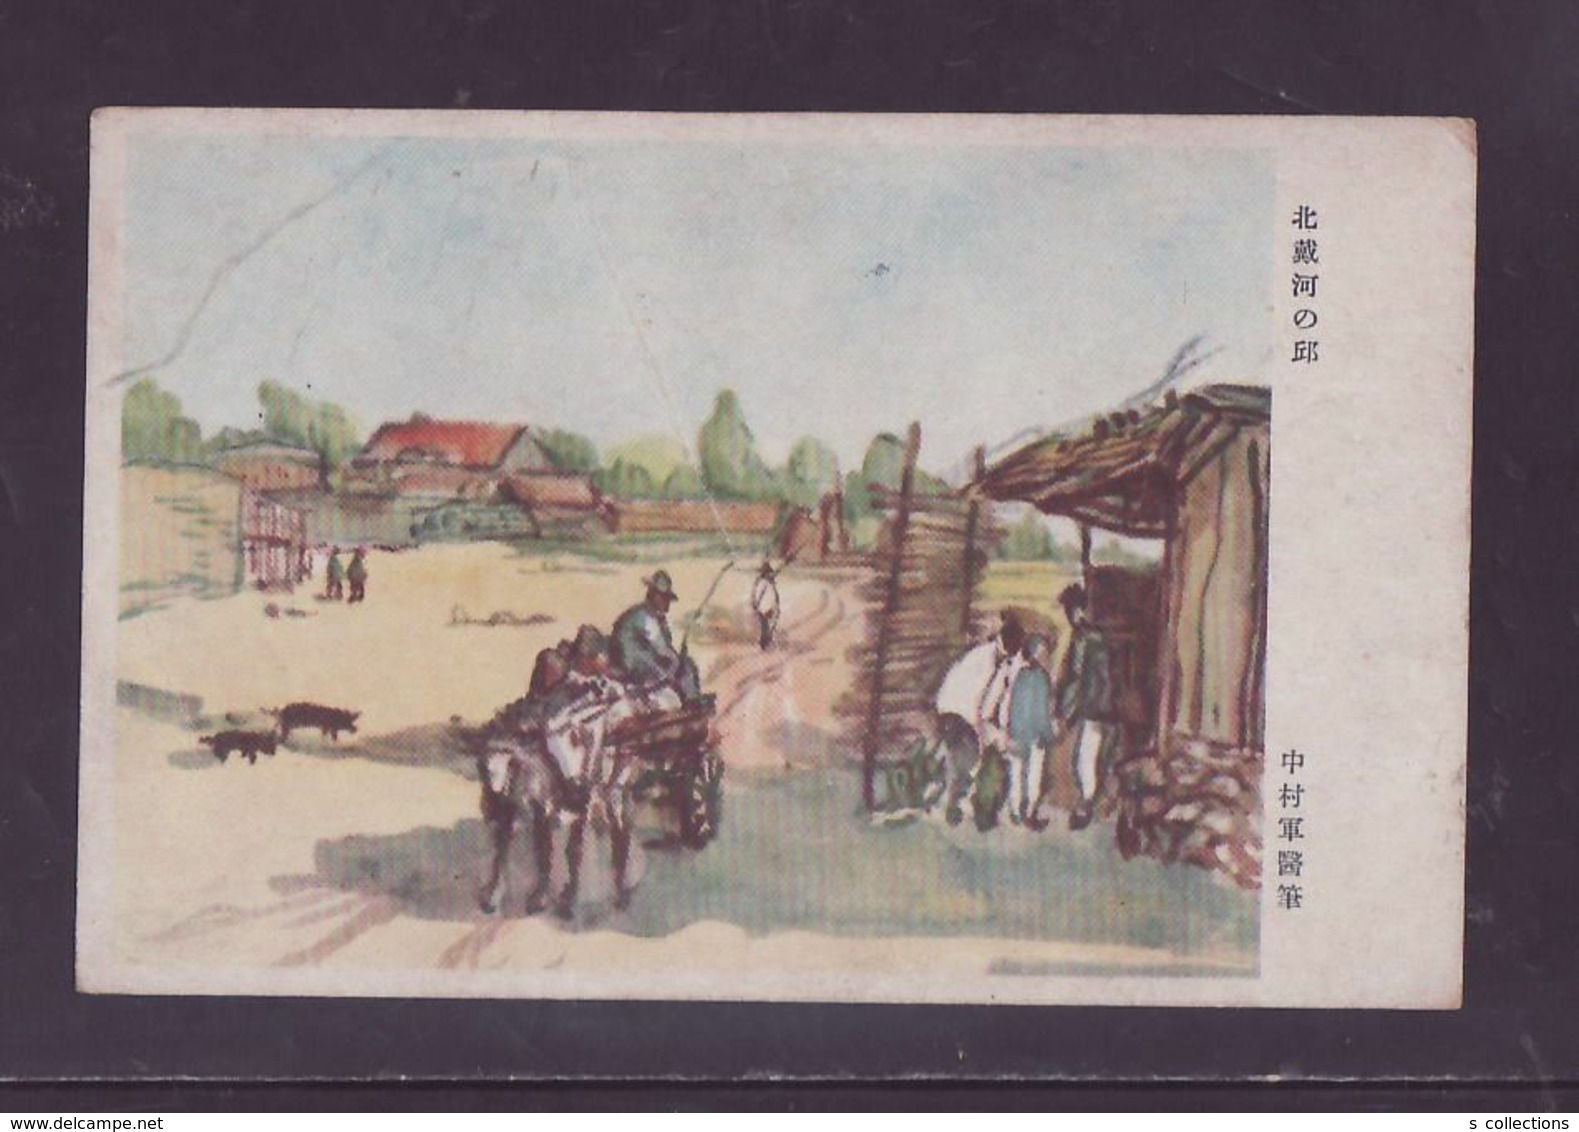 JAPAN WWII Military Hill Of Beidaihe Picture Postcard North China WW2 MANCHURIA CHINE MANDCHOUKOUO JAPON GIAPPONE - 1941-45 Noord-China